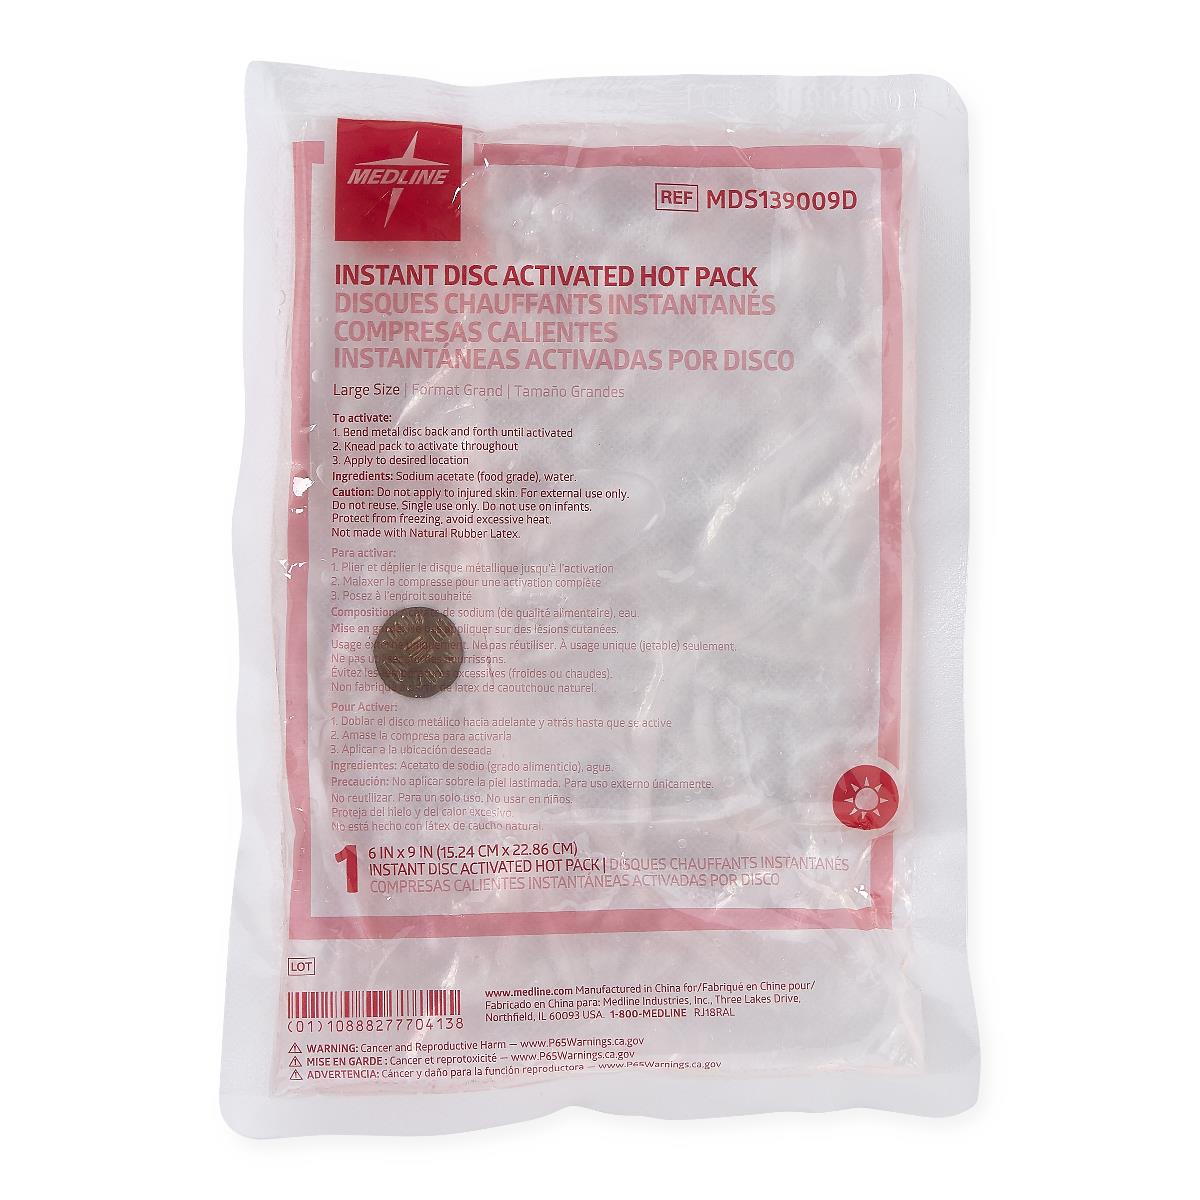 Medline Disc-Activated Instant Hot Pack 7x9 30Ct